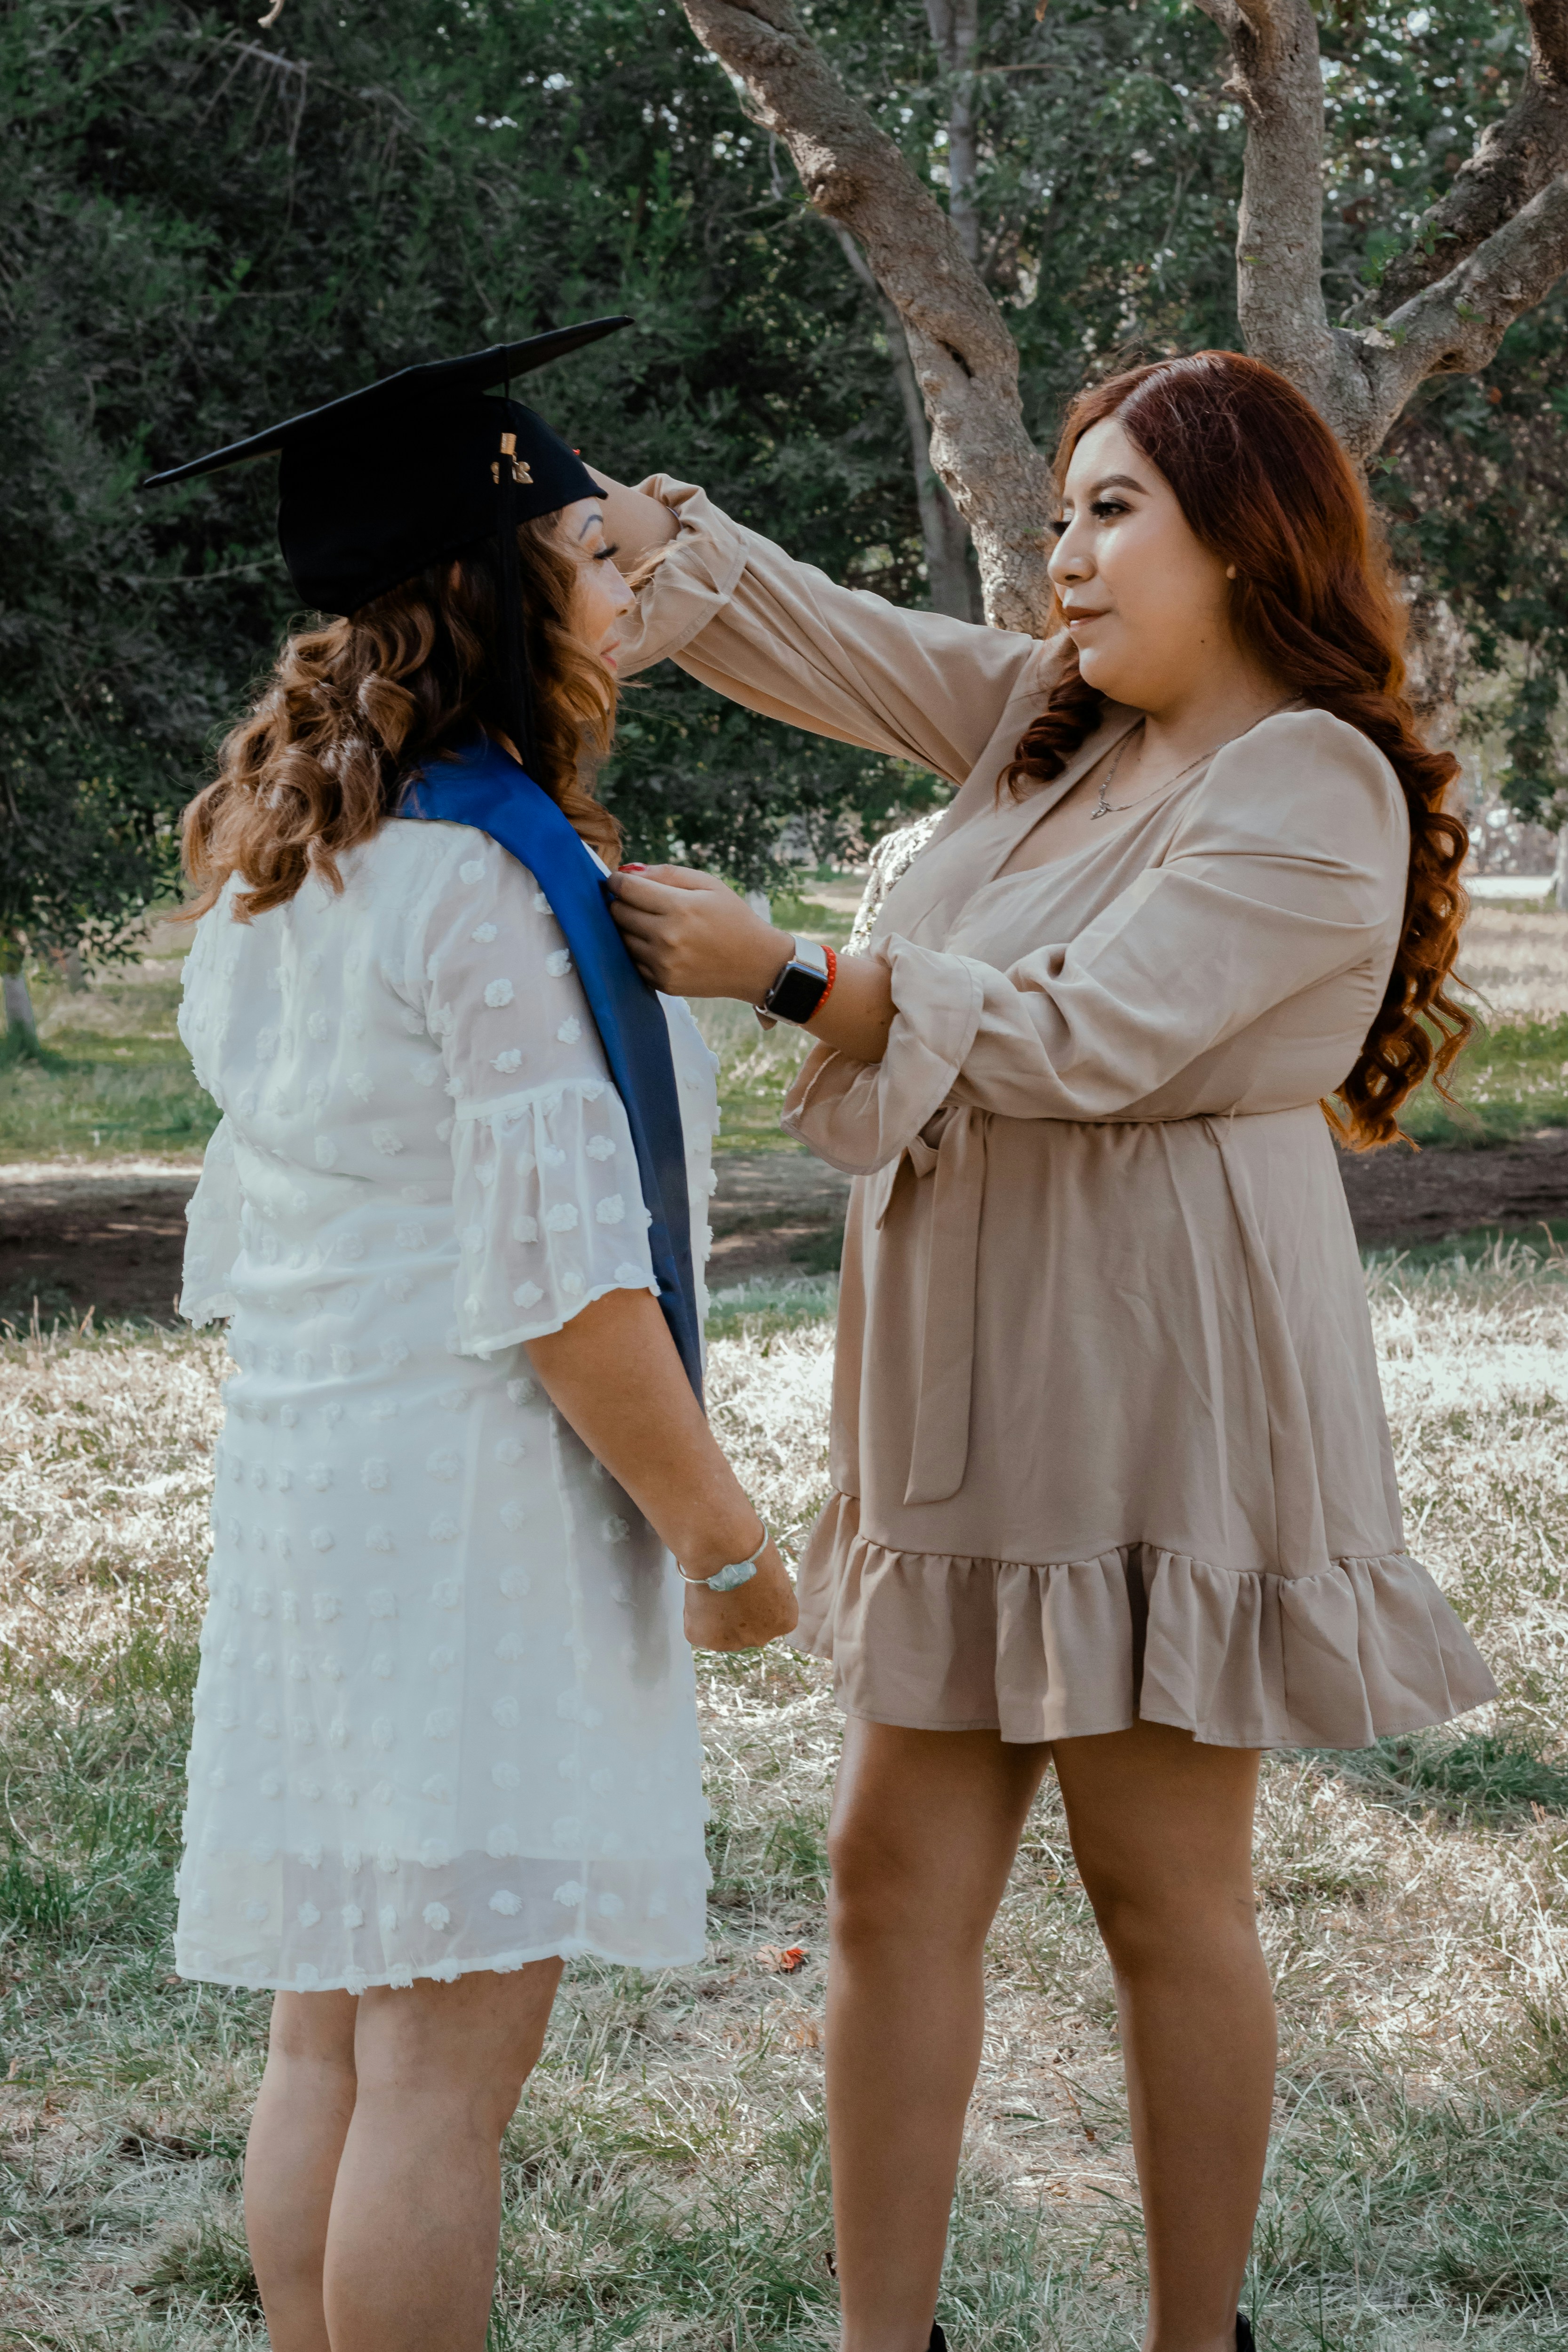 Graduation is always one of the biggest moments of your life, whether it's from high school, college, or grad school. Unsplash has a gorgeous collection of graduation pictures, so you can depict it the right way. 100% free to use!